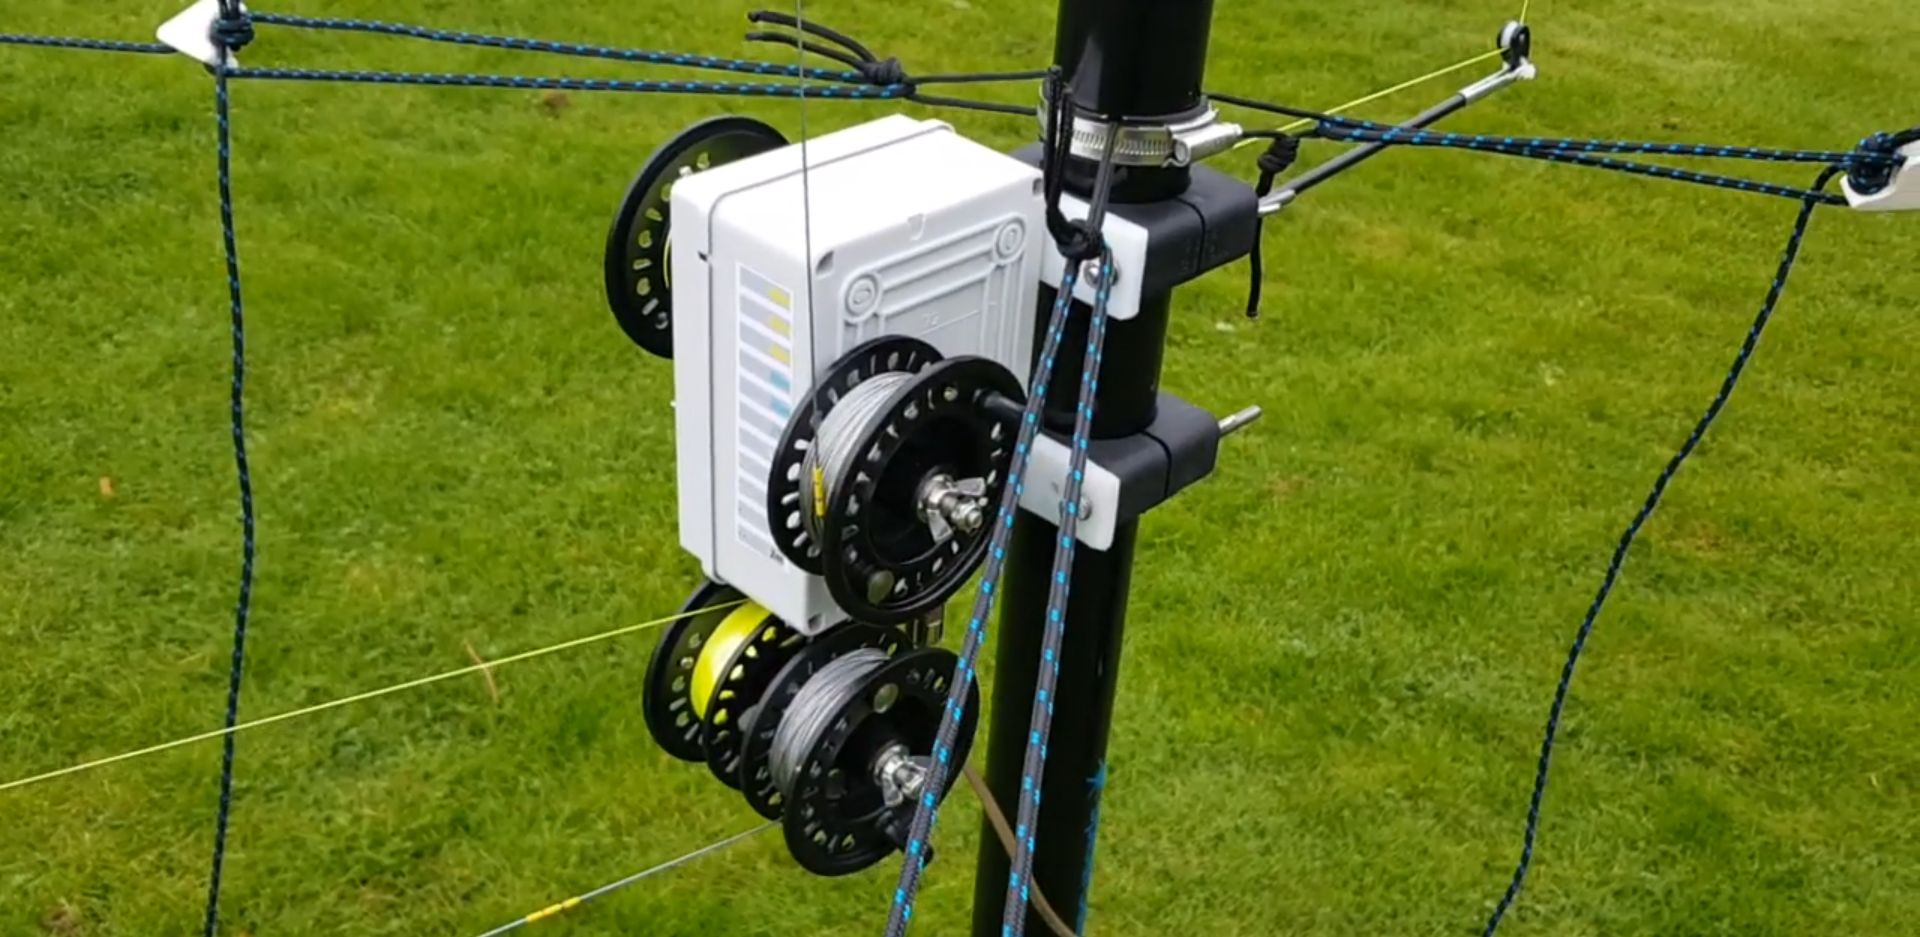 Intercontinental Radio Communications With The Help Of Fly Fishing